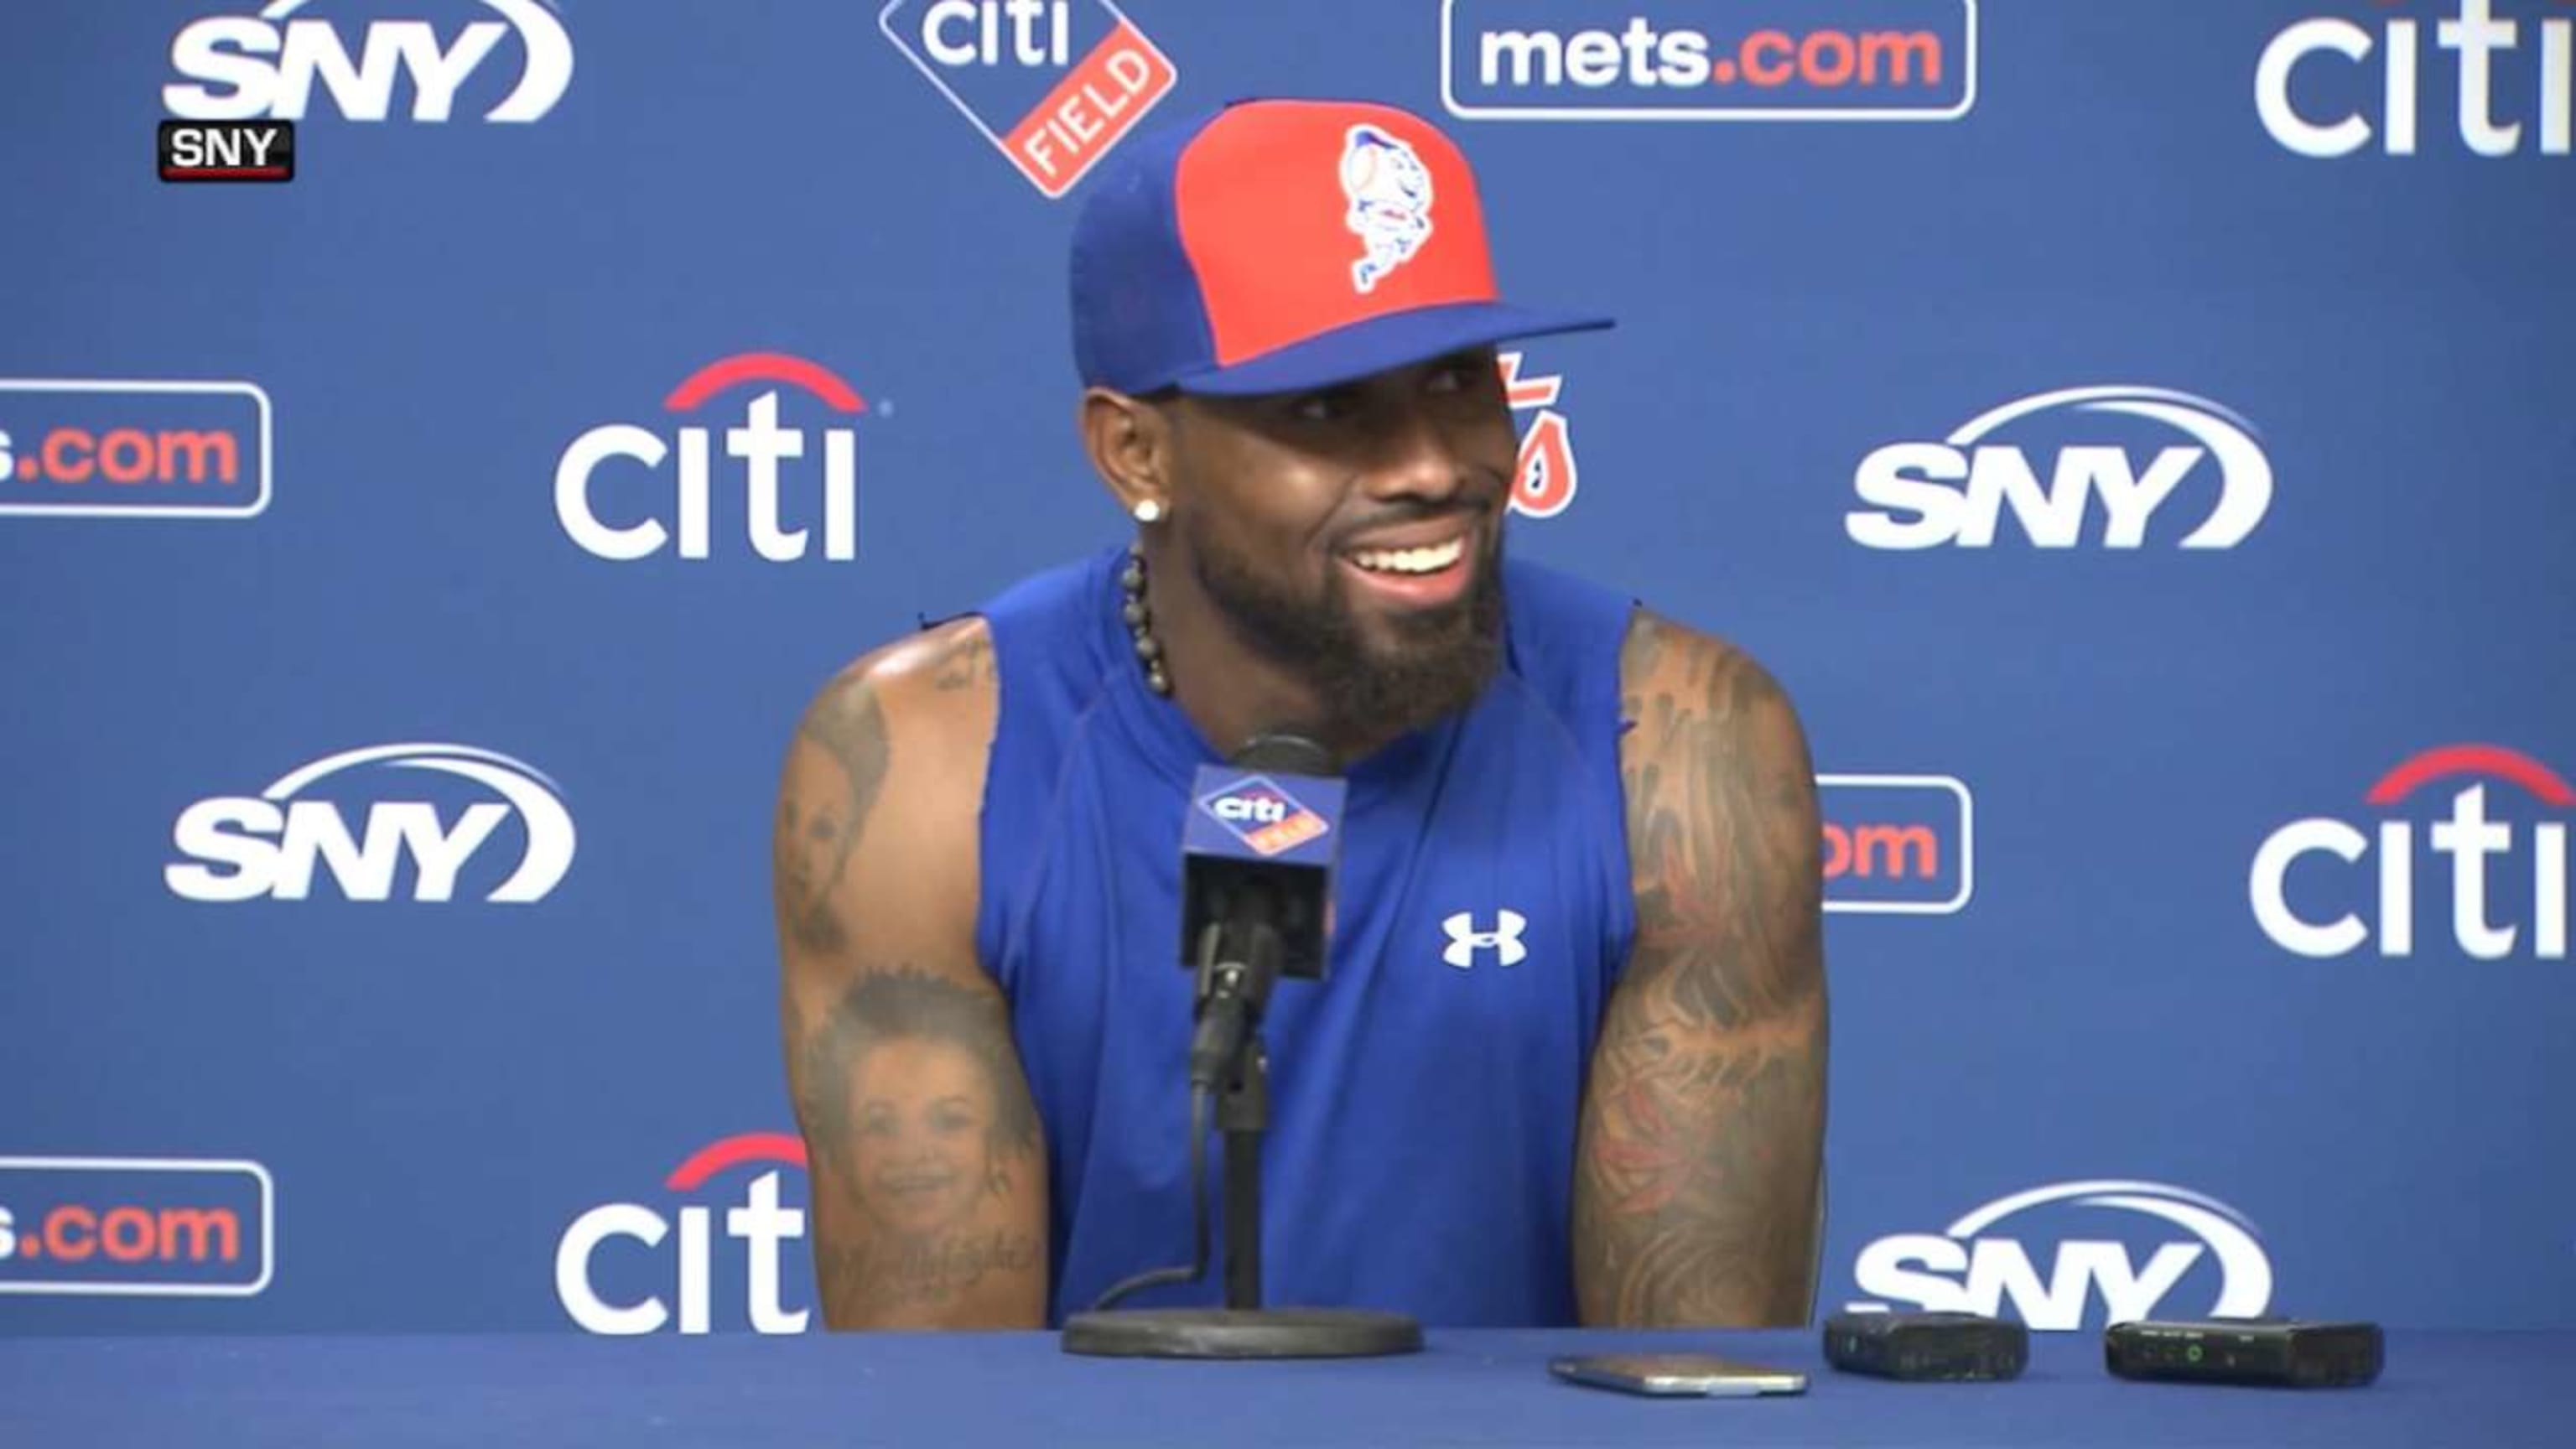 Shortstop Jose Reyes, who starred with the Mets, officially